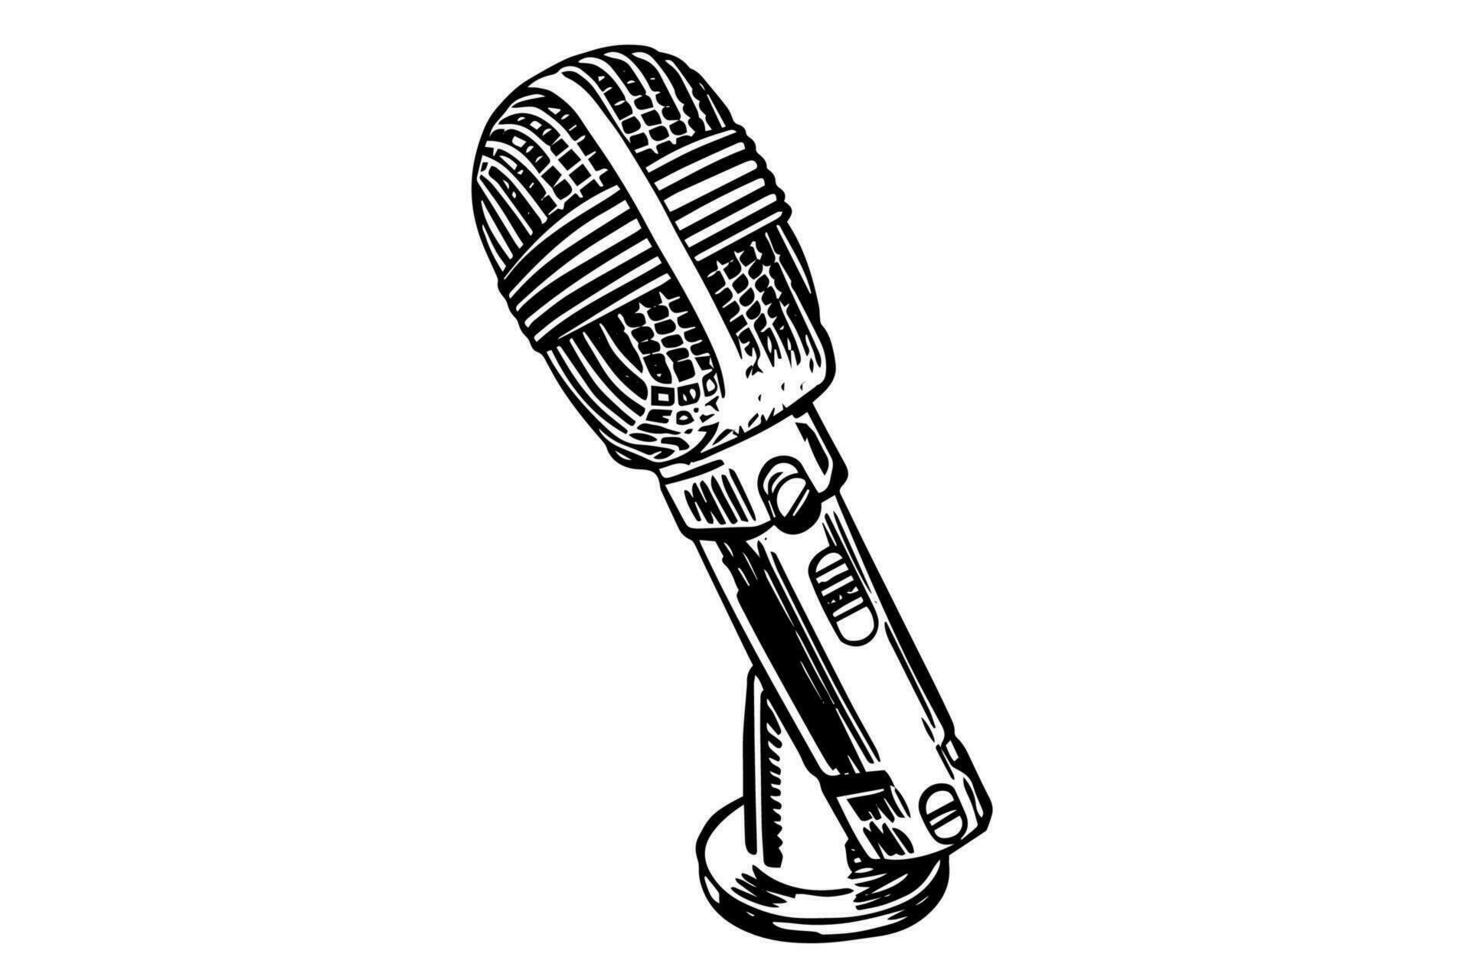 Vintage microphone hand drawn sketch engraving style vector illustration.